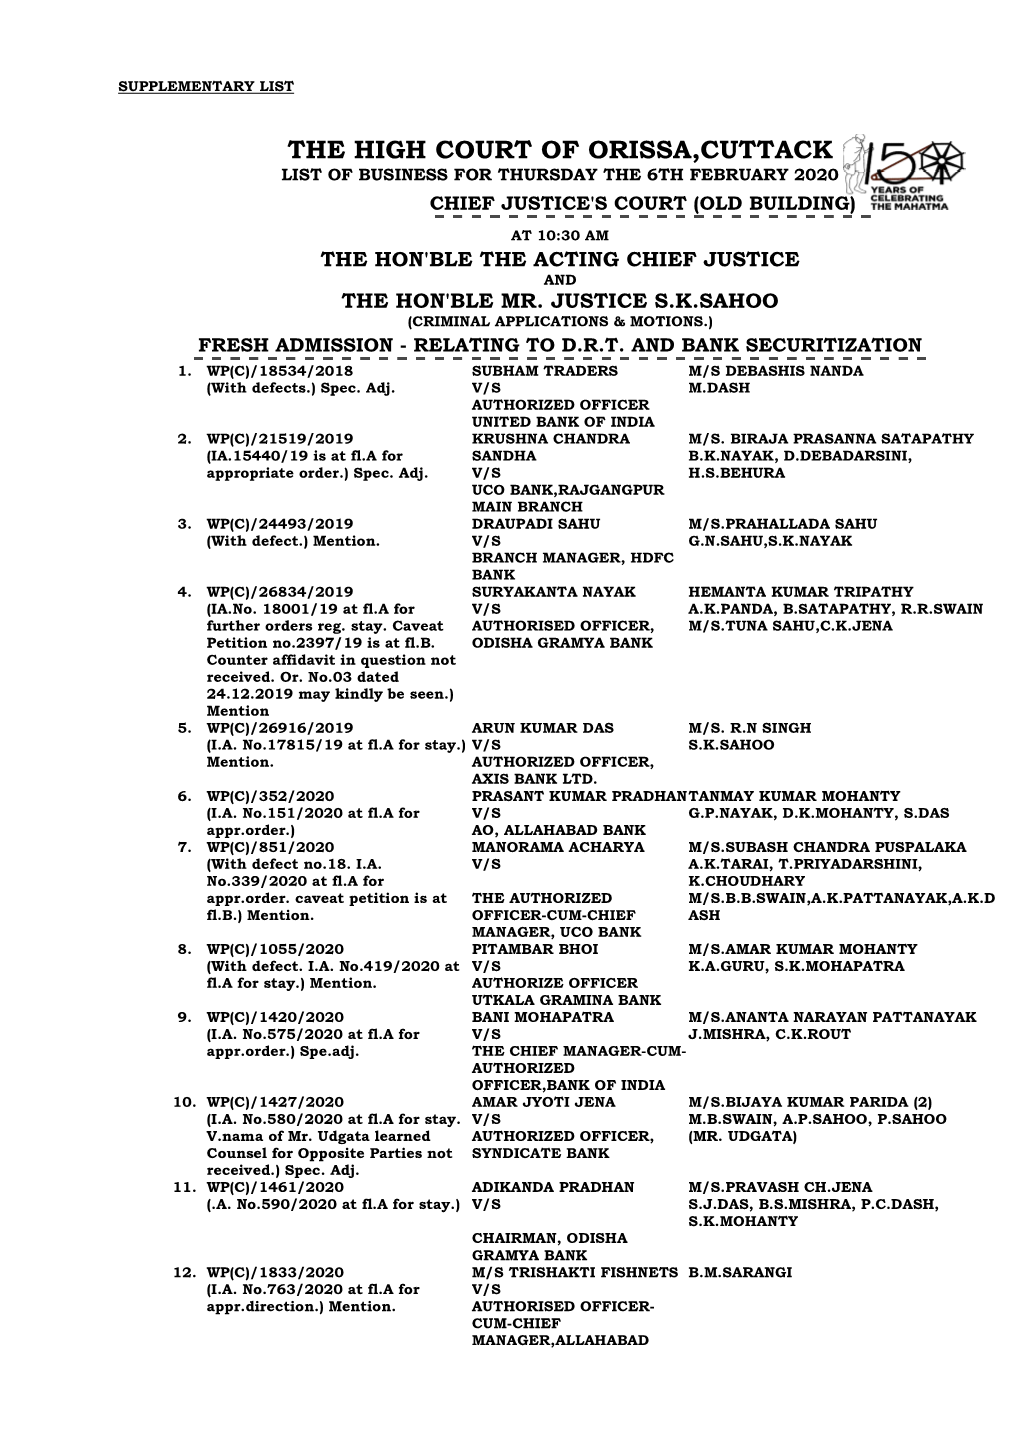 The High Court of Orissa,Cuttack List of Business for Thursday the 6Th February 2020 Chief Justice's Court (Old Building)